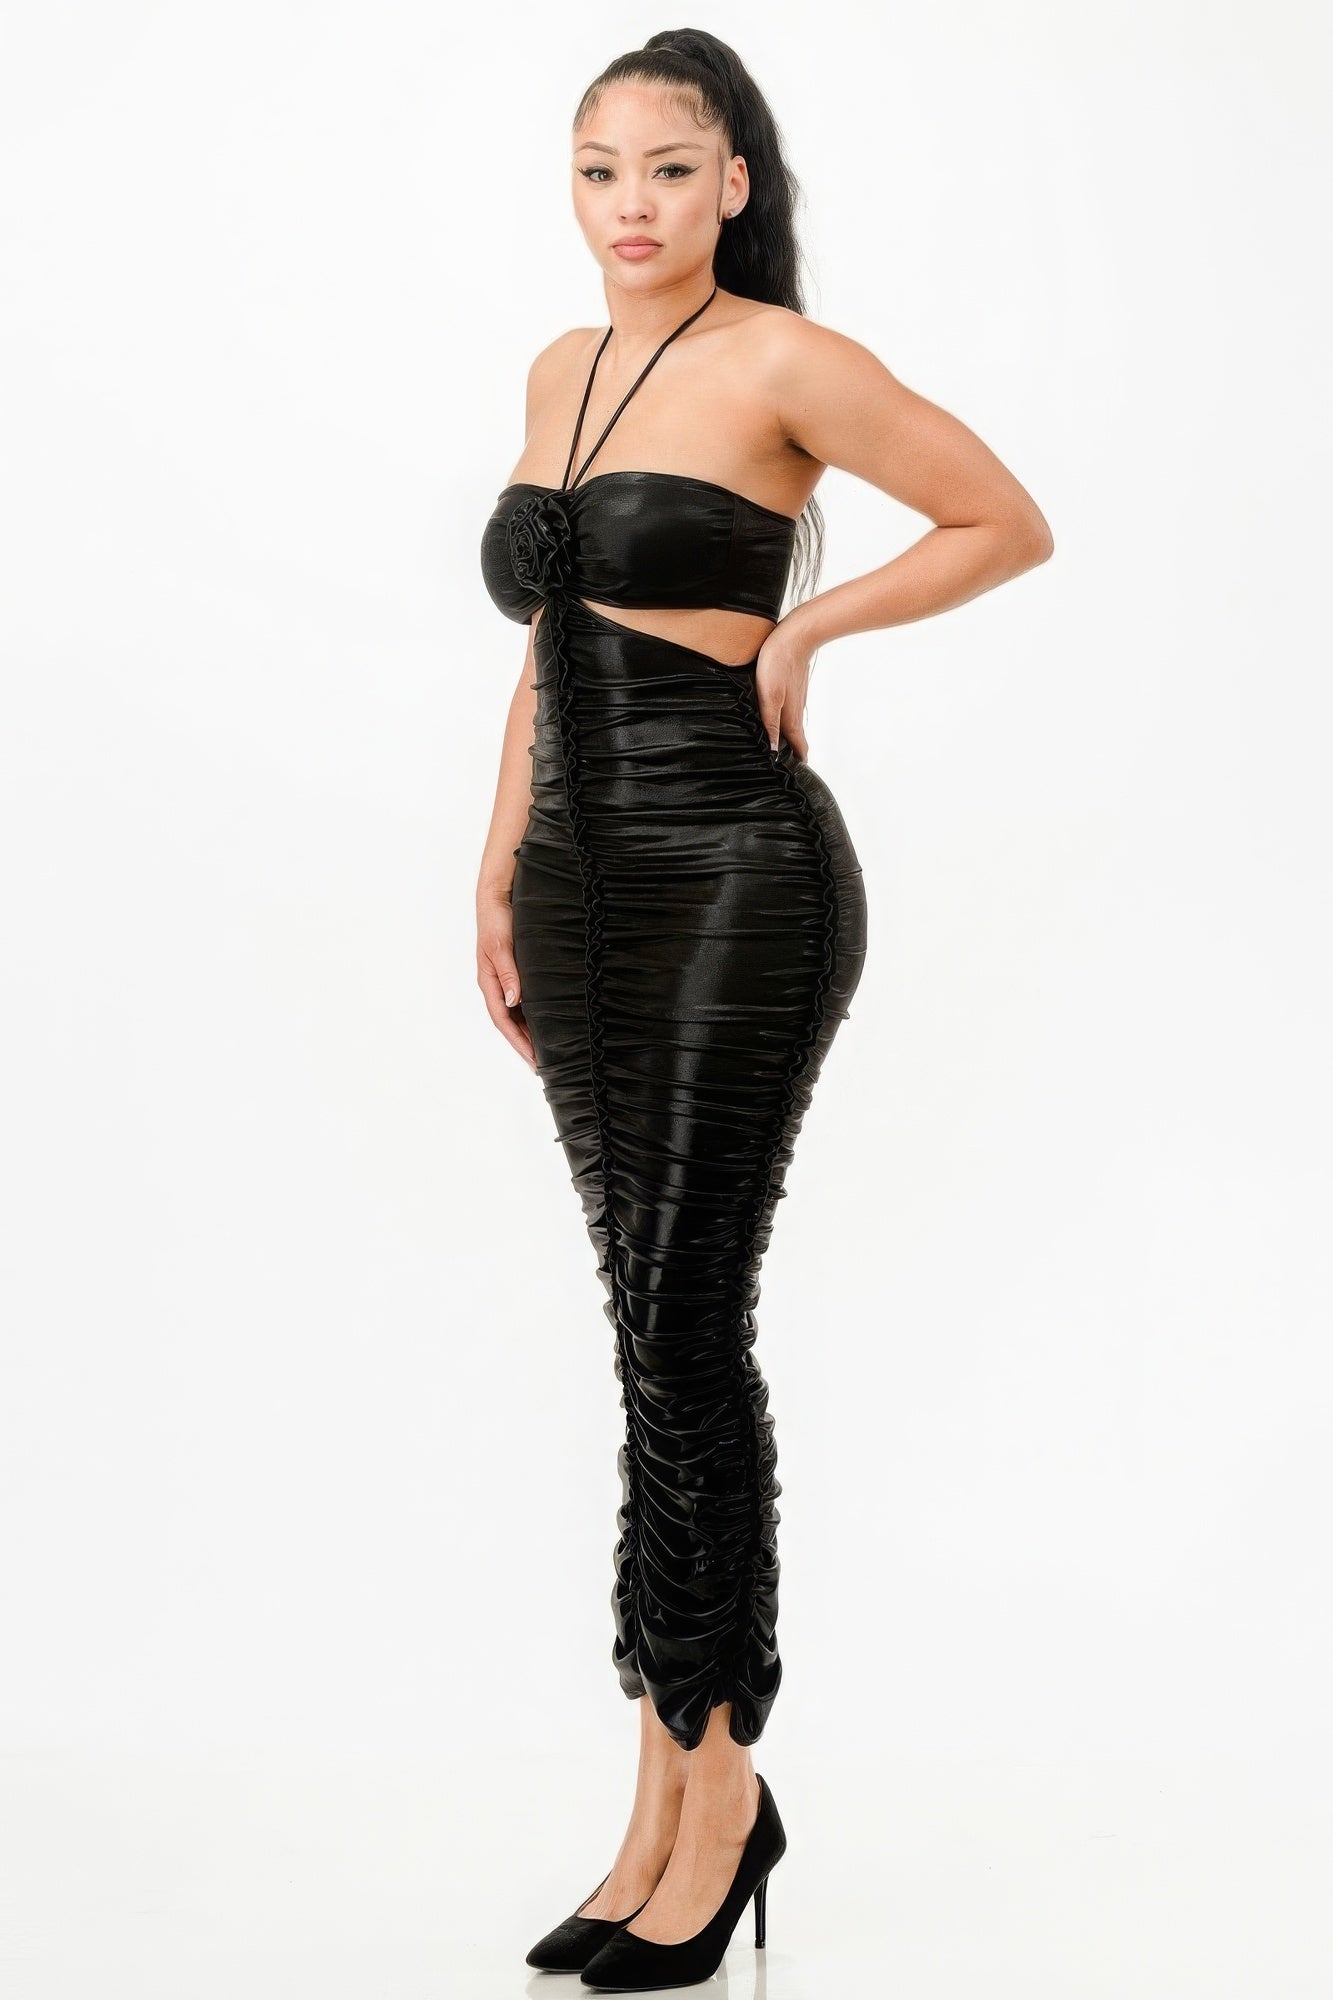 Valentine's Metallic Black Foil Halter Dress with Side Ruching & Cut Out